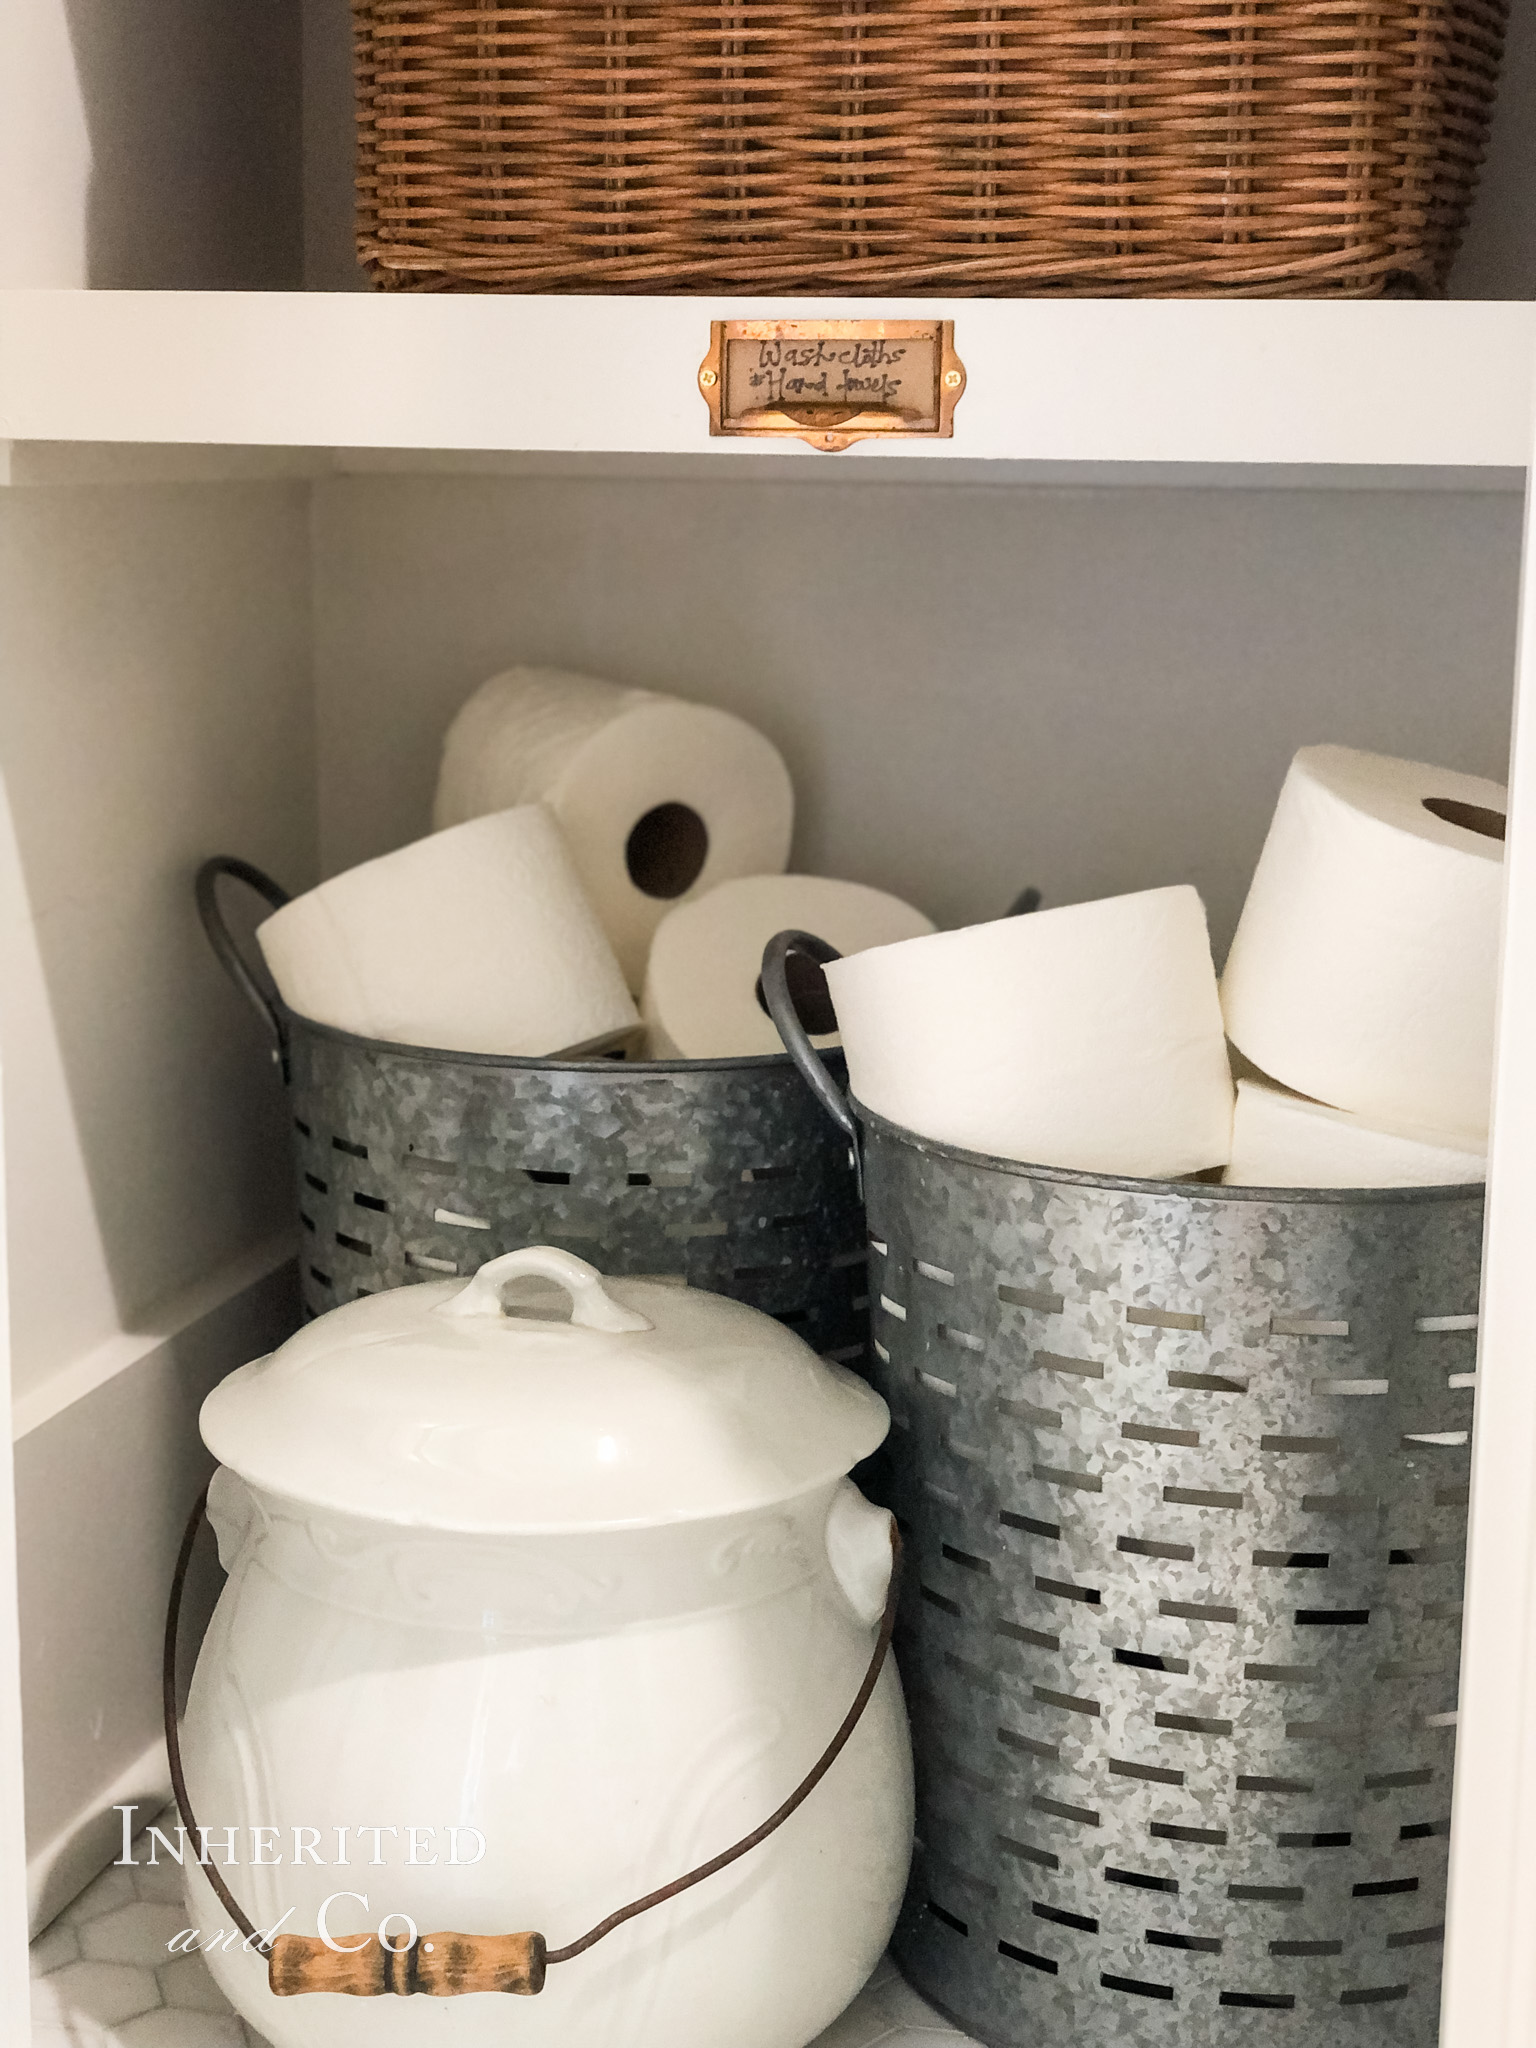 Antique Ironstone Slop Jar and Reproduction Olive Buckets used in a Linen Closet